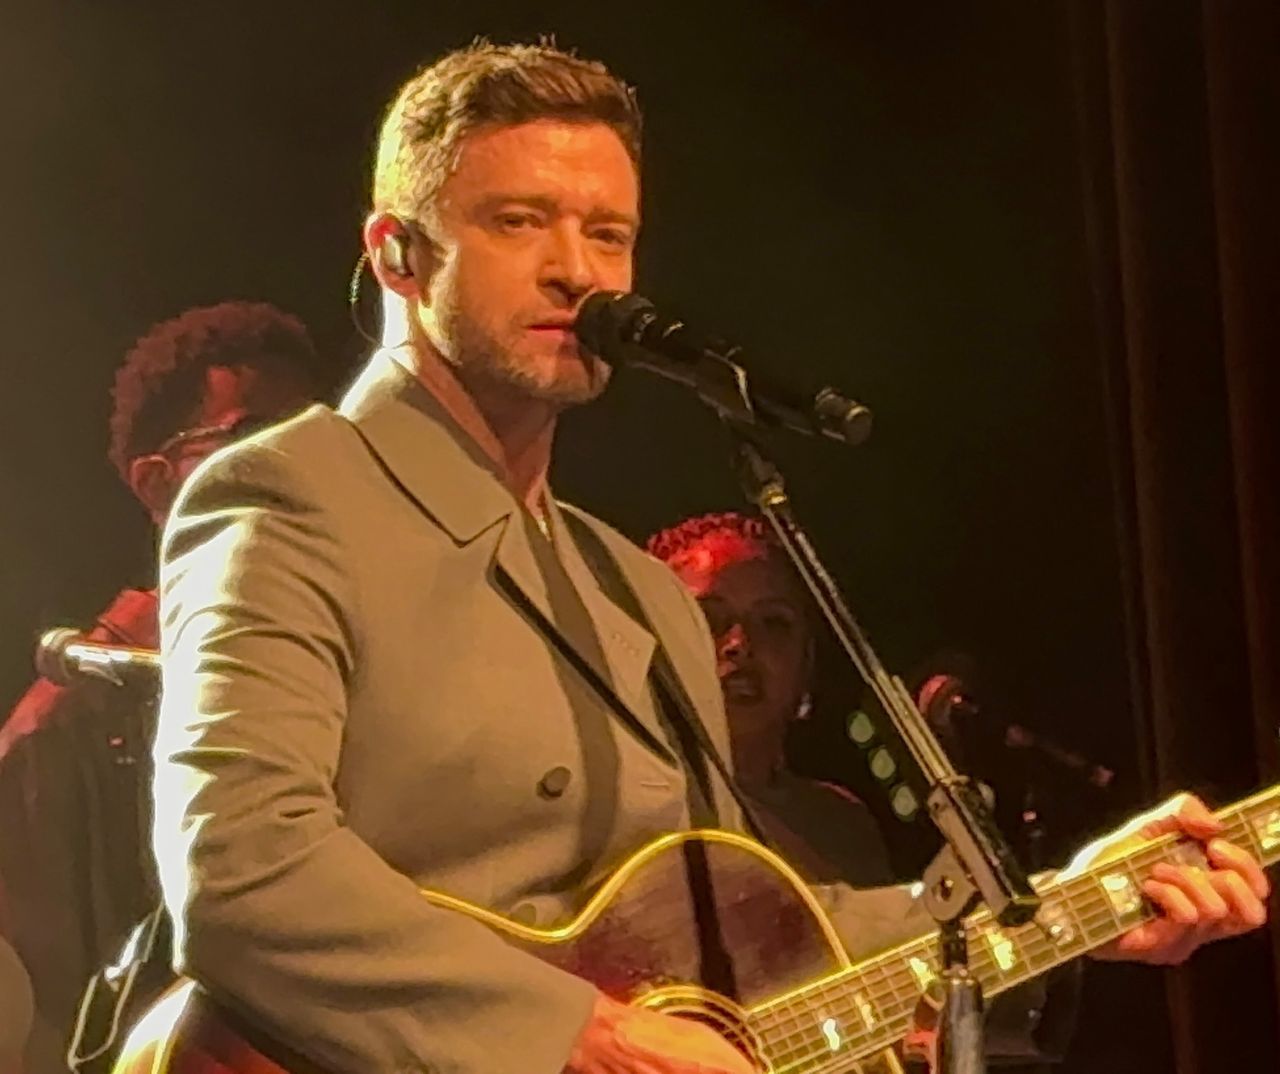 Justin Timberlake at a concert at Irving Plaza in New York